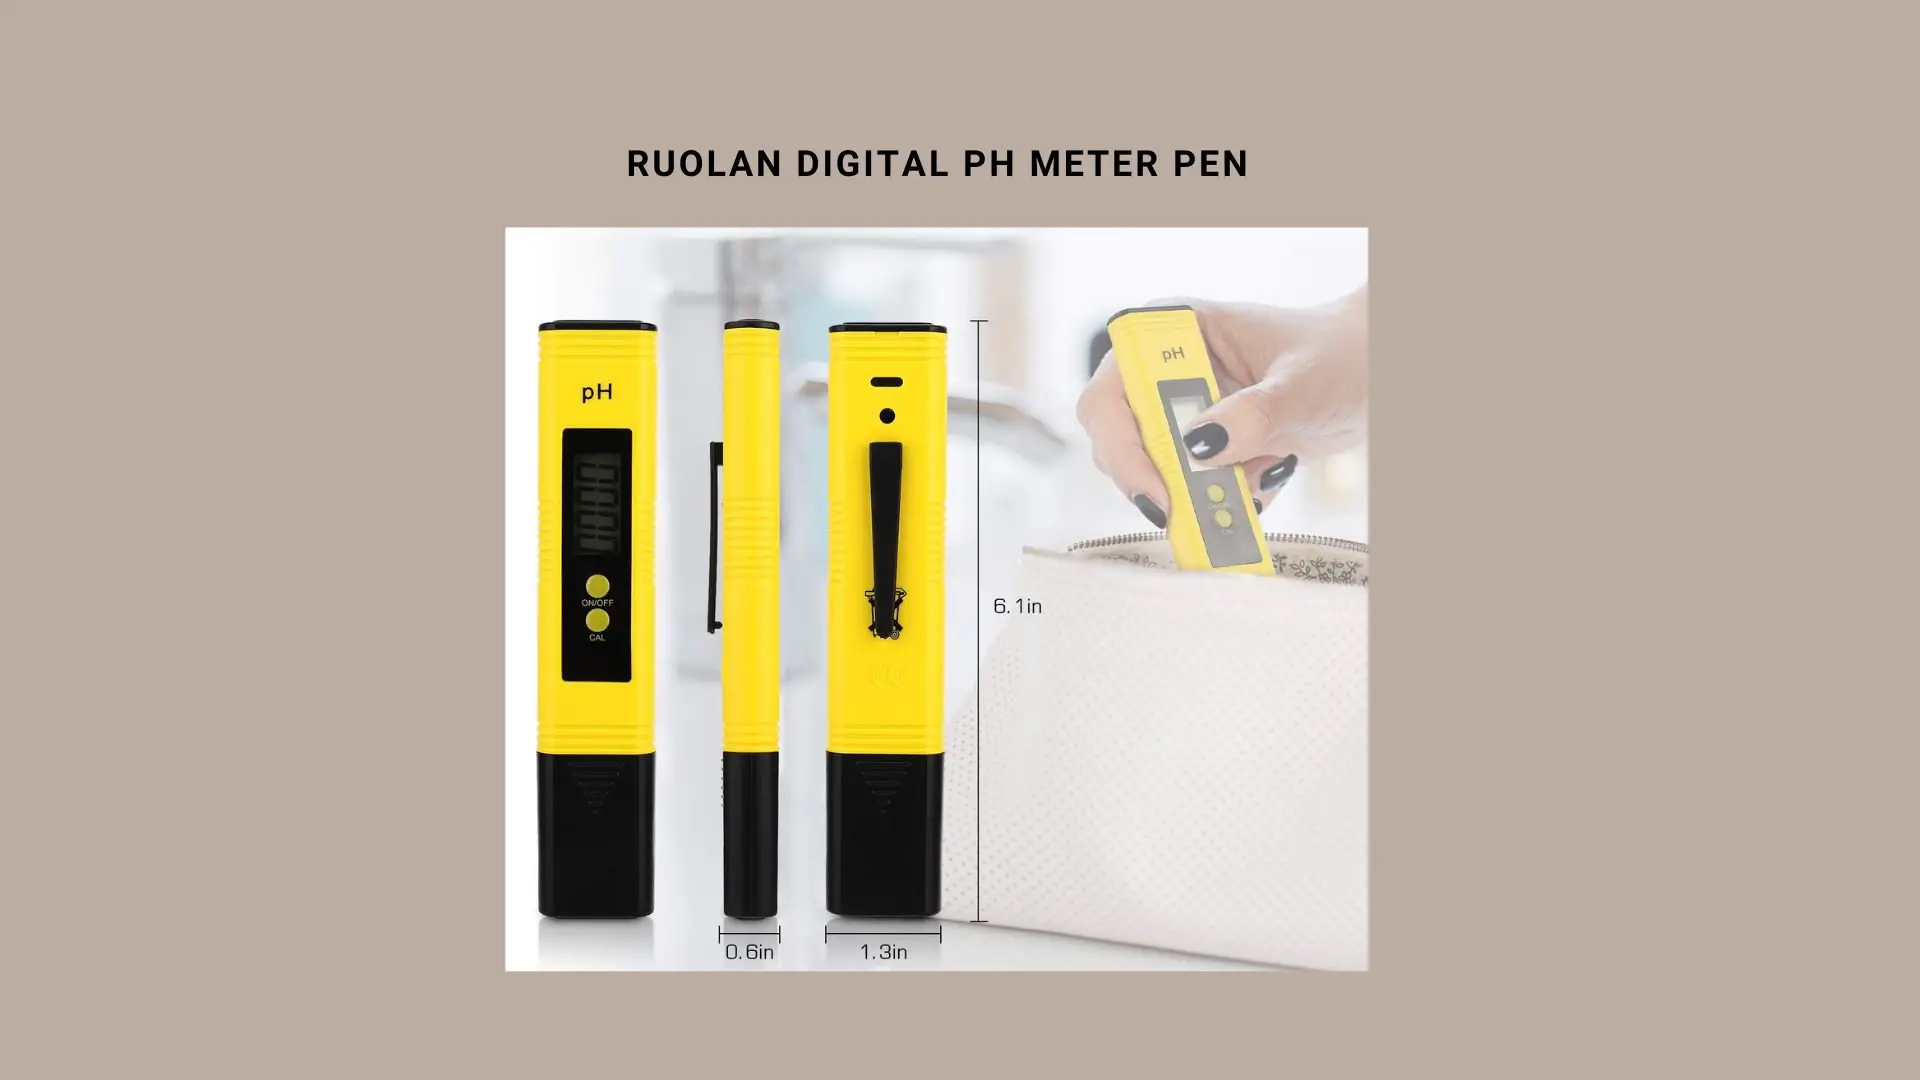 % Looking for an accurate and easy-to-use digital pH meter? Read our candid review of the Ruolan Digital PH Tester Pen to learn more about its benefits, drawbacks, and overall value. Get all the info you need before investing in this device!